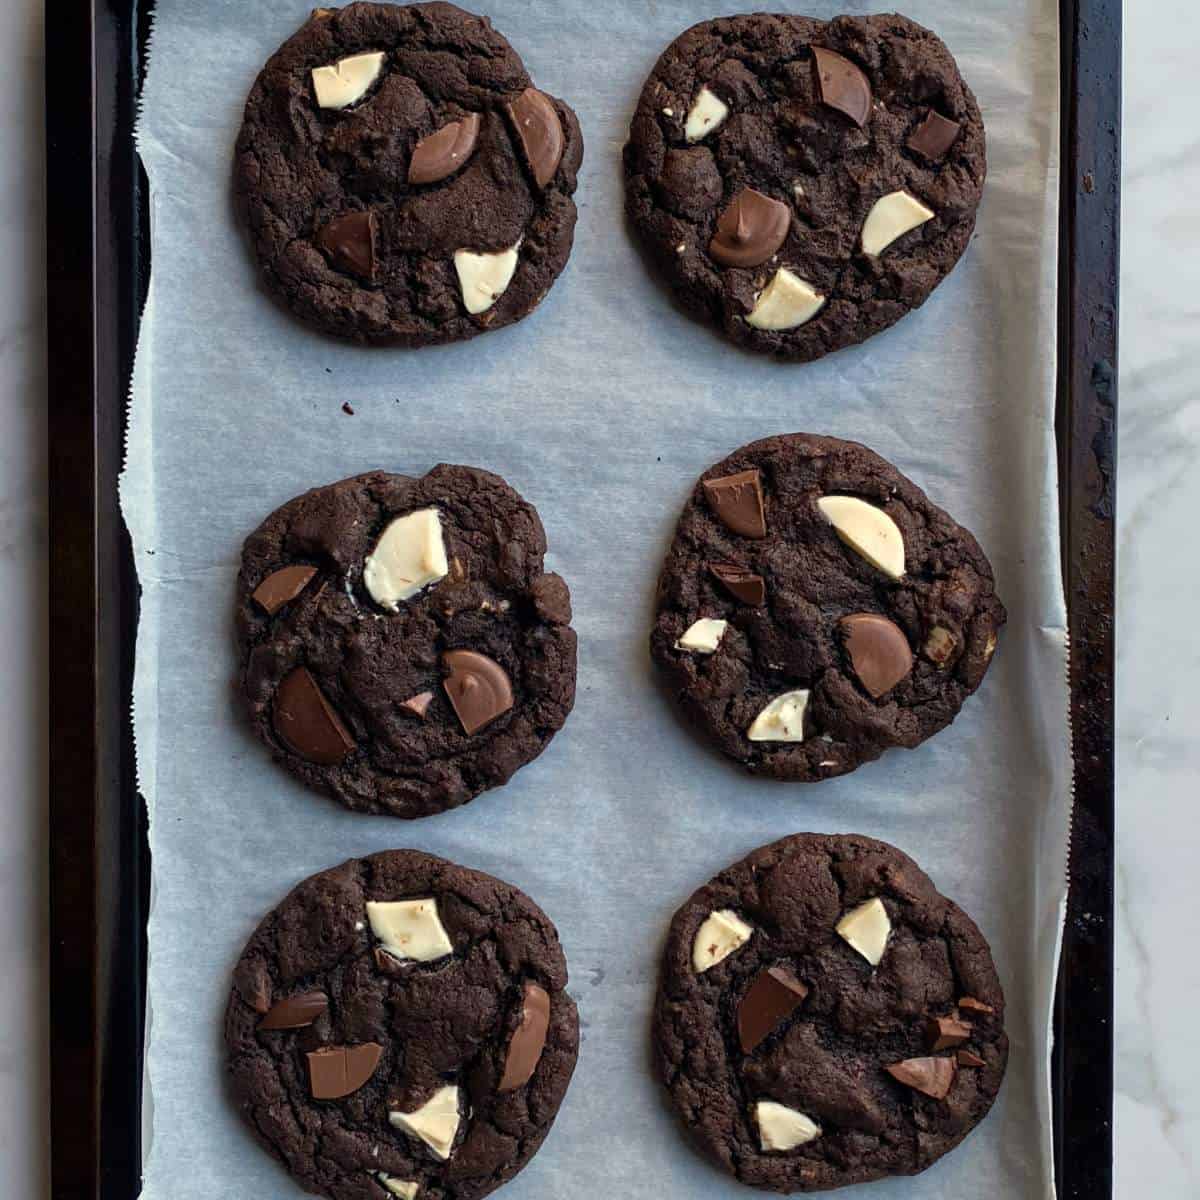 Cooked Triple Chocolate Cookies on a baking tray